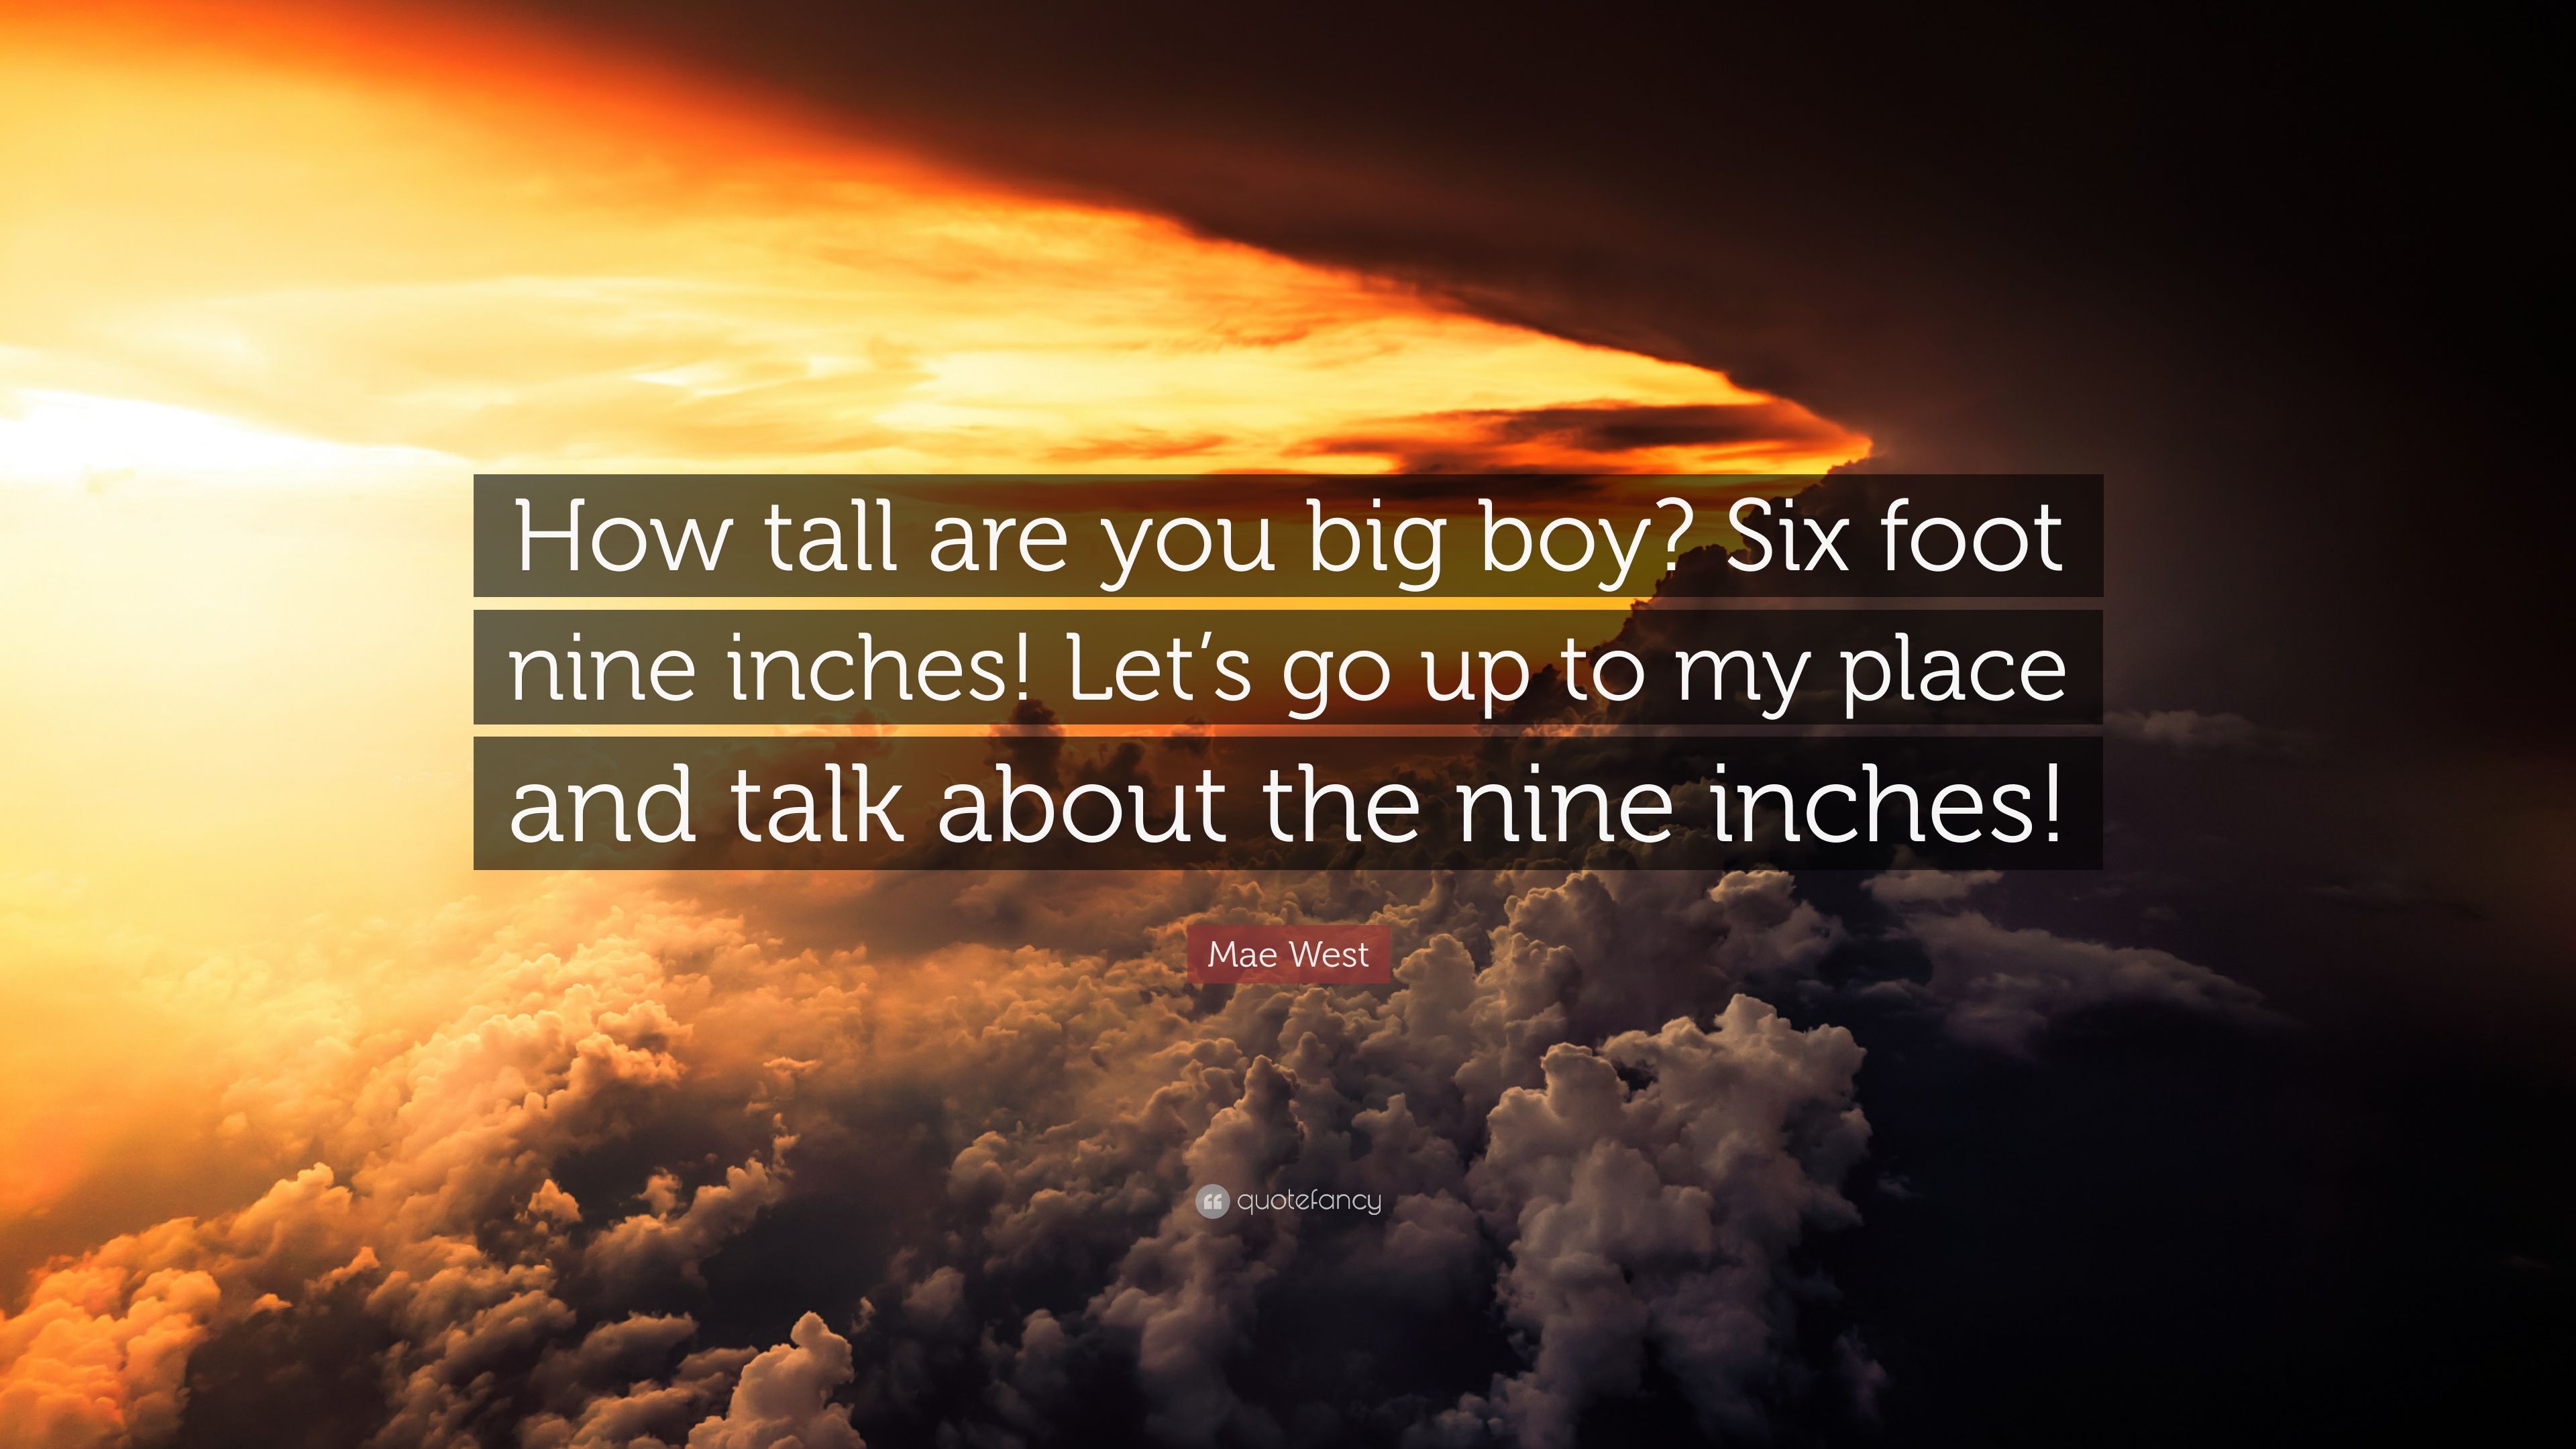 Mae West Quote: “How tall are you big boy? Six foot nine inches